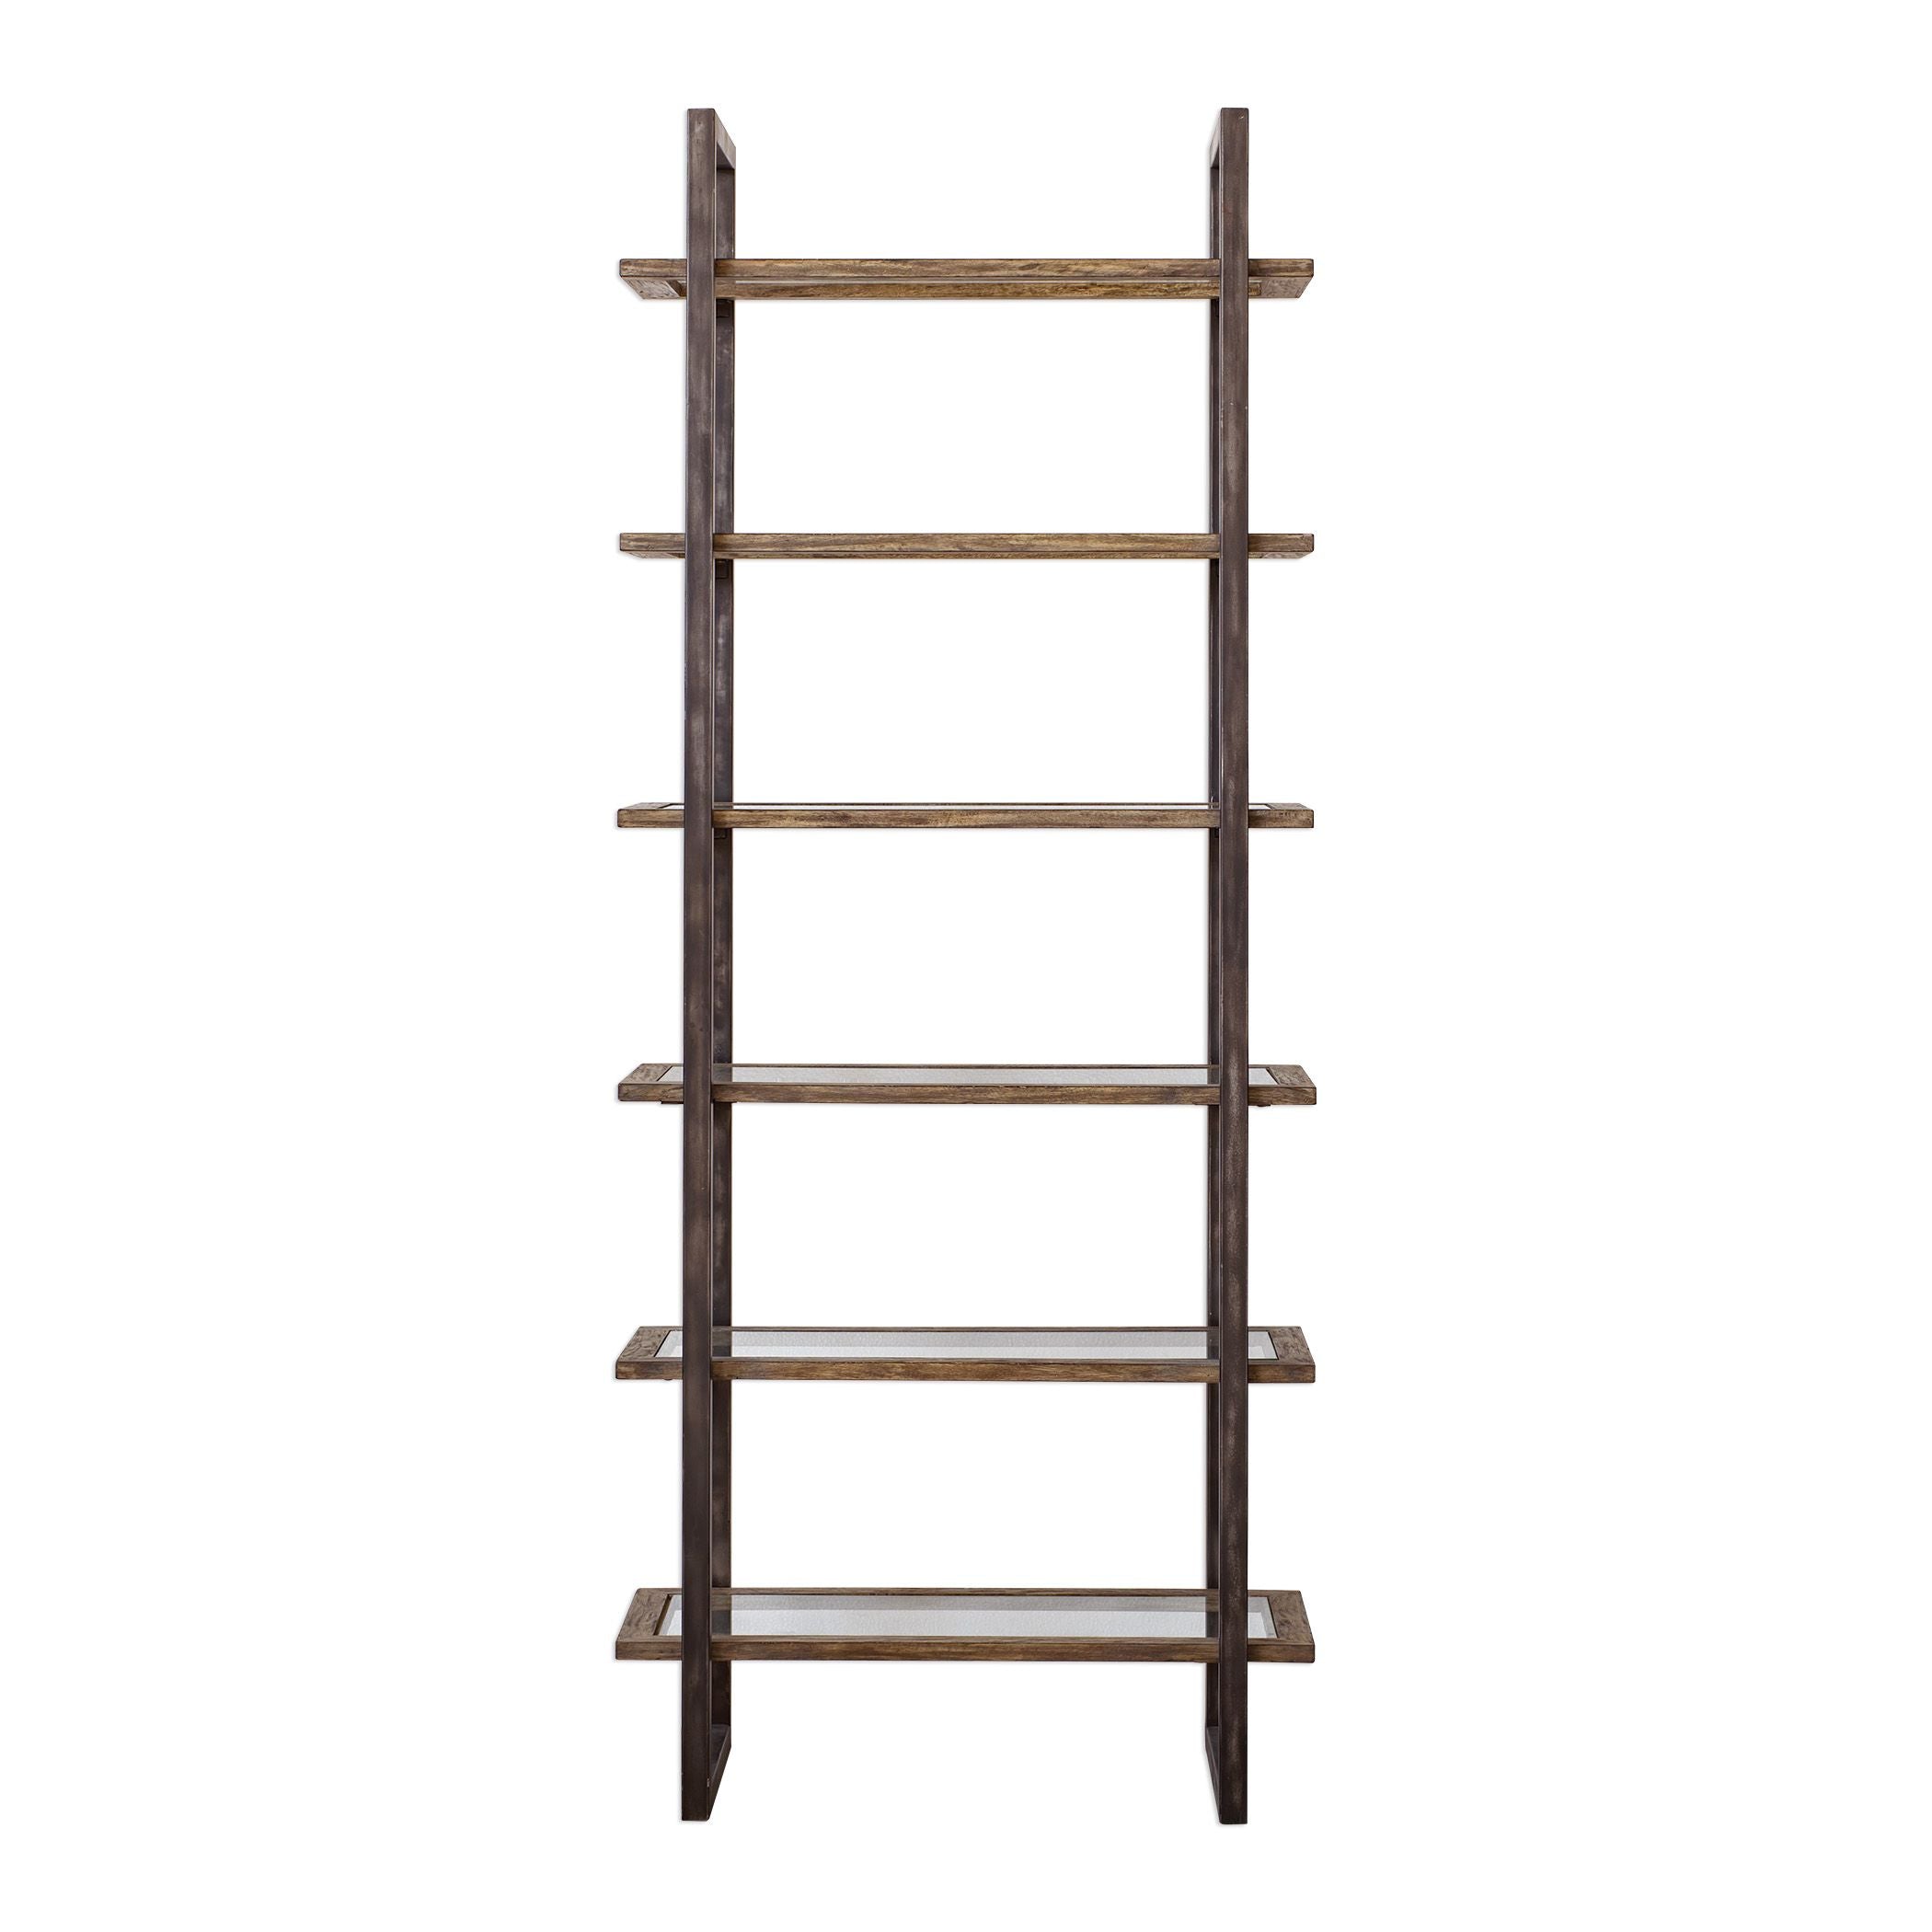 Olwyn Industrial Aged Steel Etagere With Inset Glass Shelves